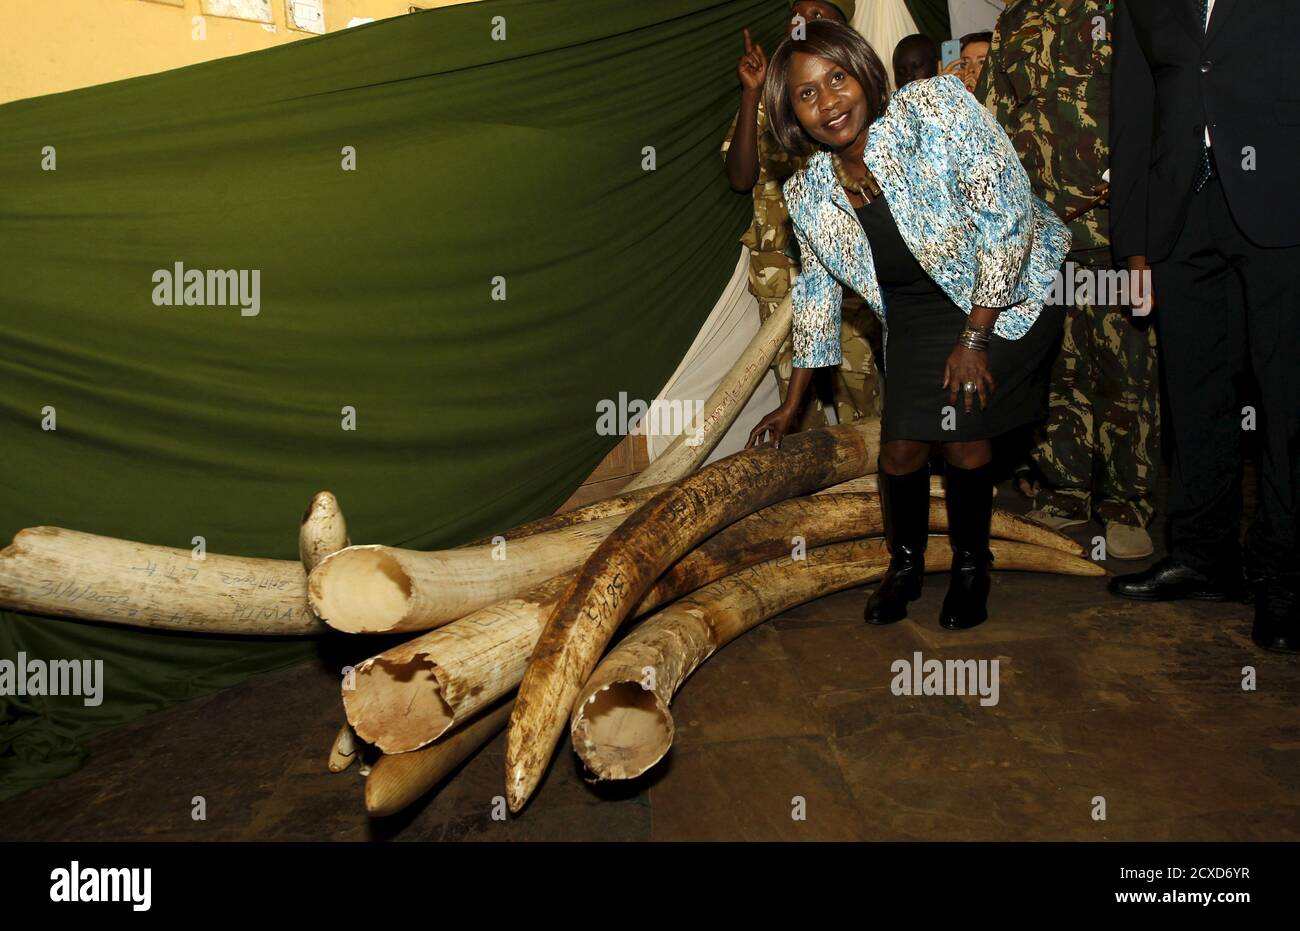 Kenya's Cabinet Secretary Ministry of Environment and Natural Resources Judi Wakhungu touches elephant tusks recovered from various operations at the Kenya Wildlife Services (KWS) headquarters in the capital Nairobi, July 21, 2015, during the commissioning of the inventory exercise of the national elephant ivory and rhino horn stockpile. The Kenya Wildlife Service (KWS) undertakes an annual audit of the government’s trophy stockpile, according to the KWS. REUTERS/Thomas Mukoya Stock Photo